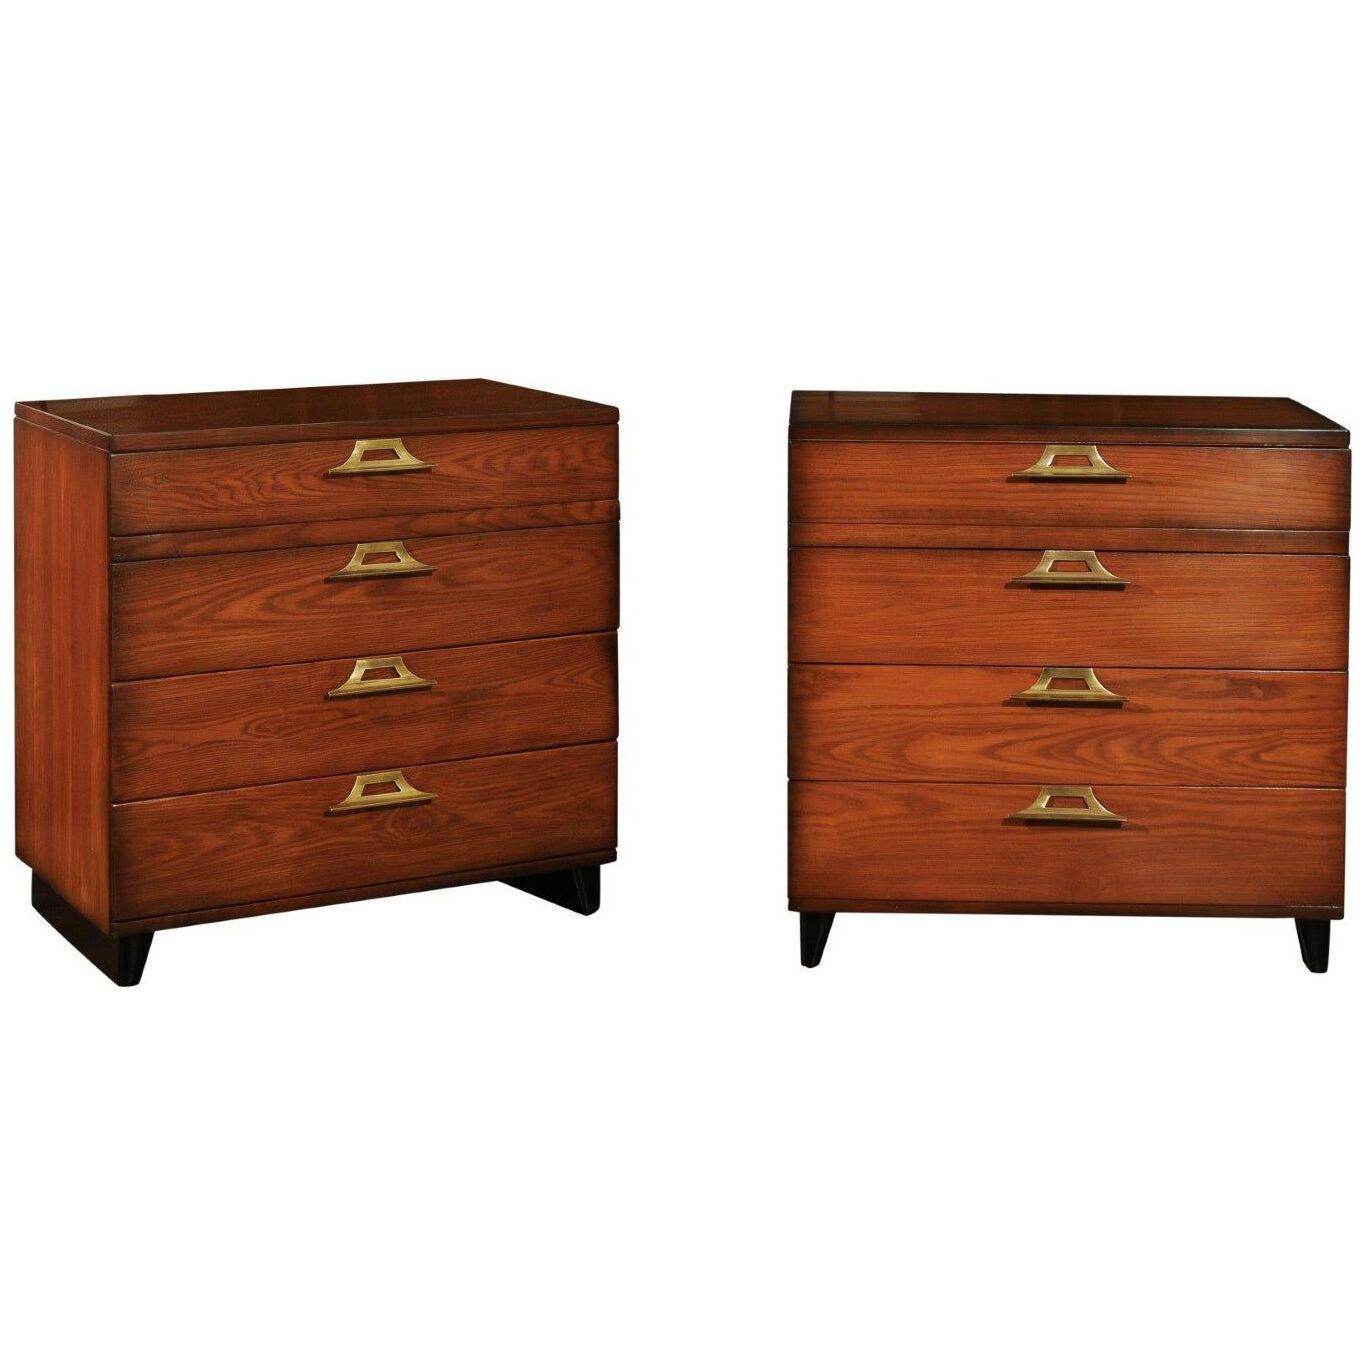 Rare Restored Pair of Pagoda Commodes by John Wisner for Ficks Reed, circa 1954